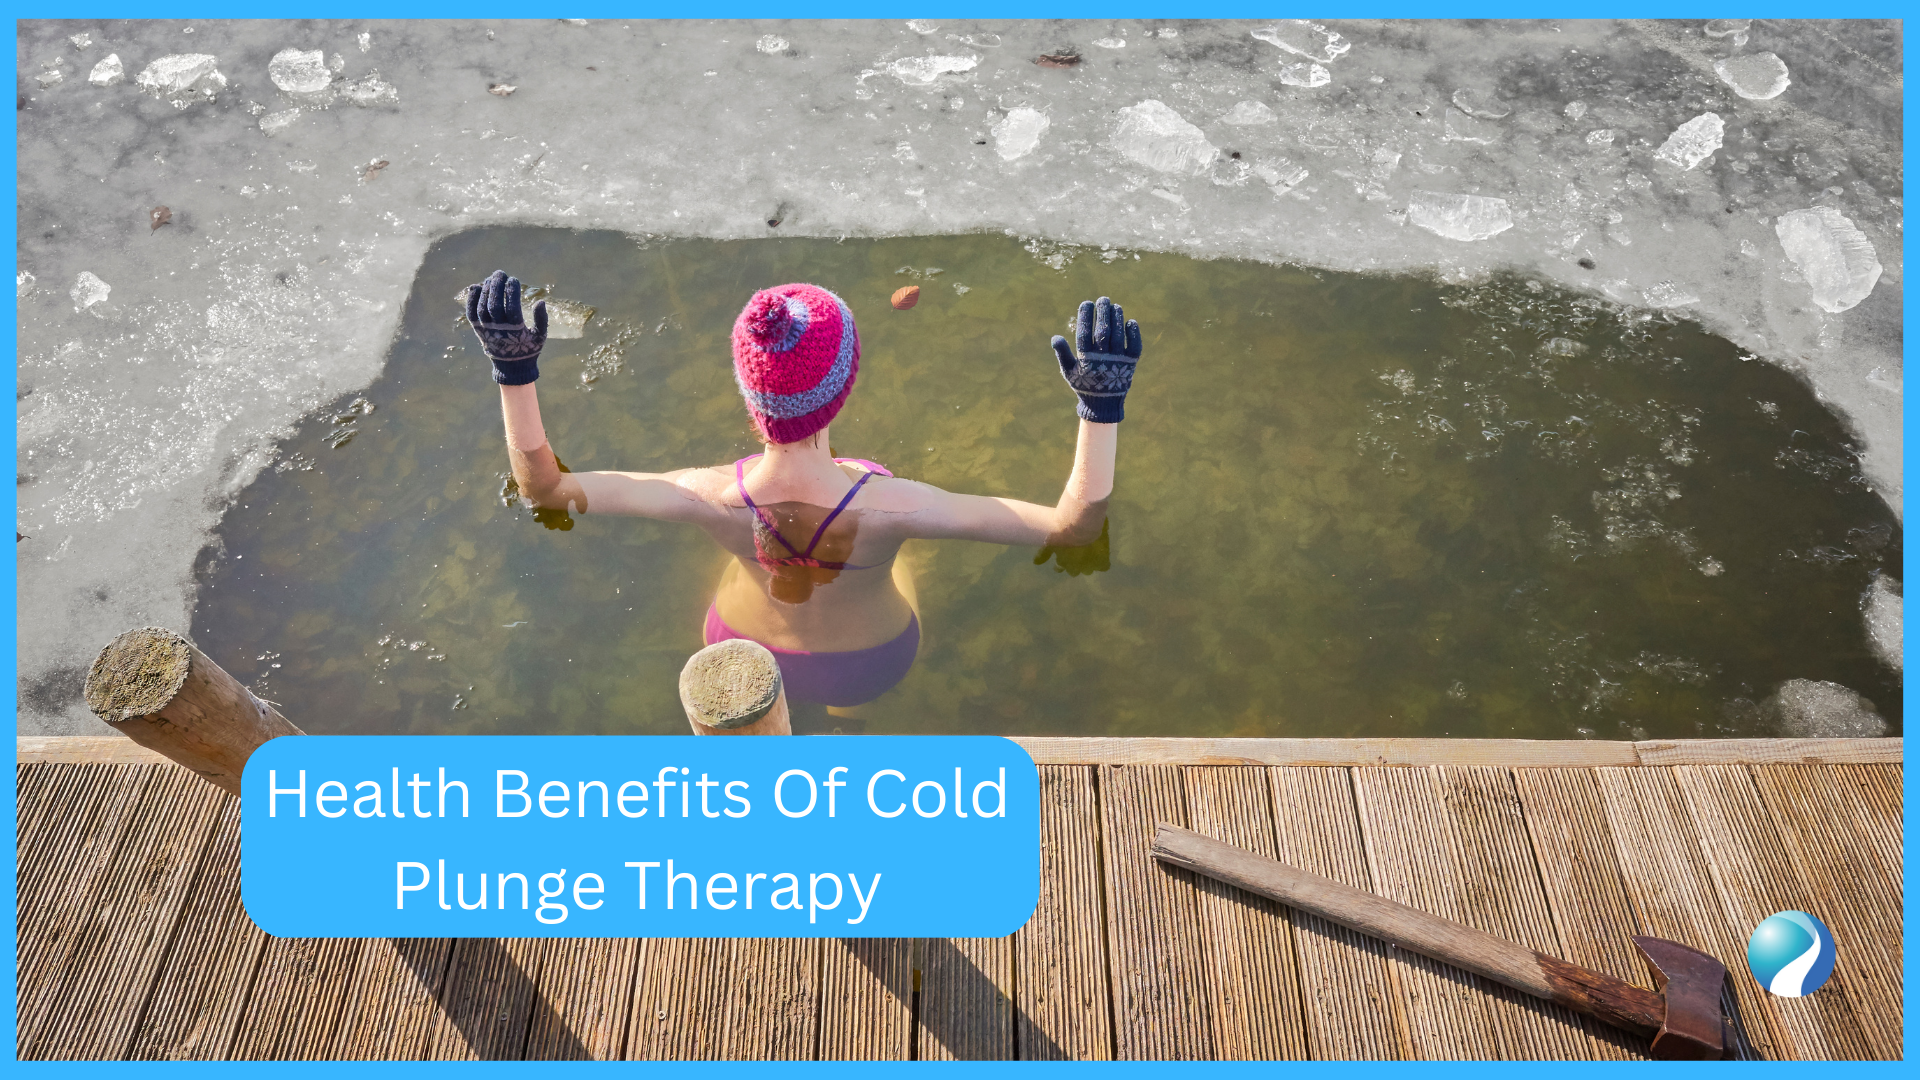 Cold @plunge have so many benefits my favorite are for my mental of pushing  through discomfort, recovering as an athlete and how I feel a